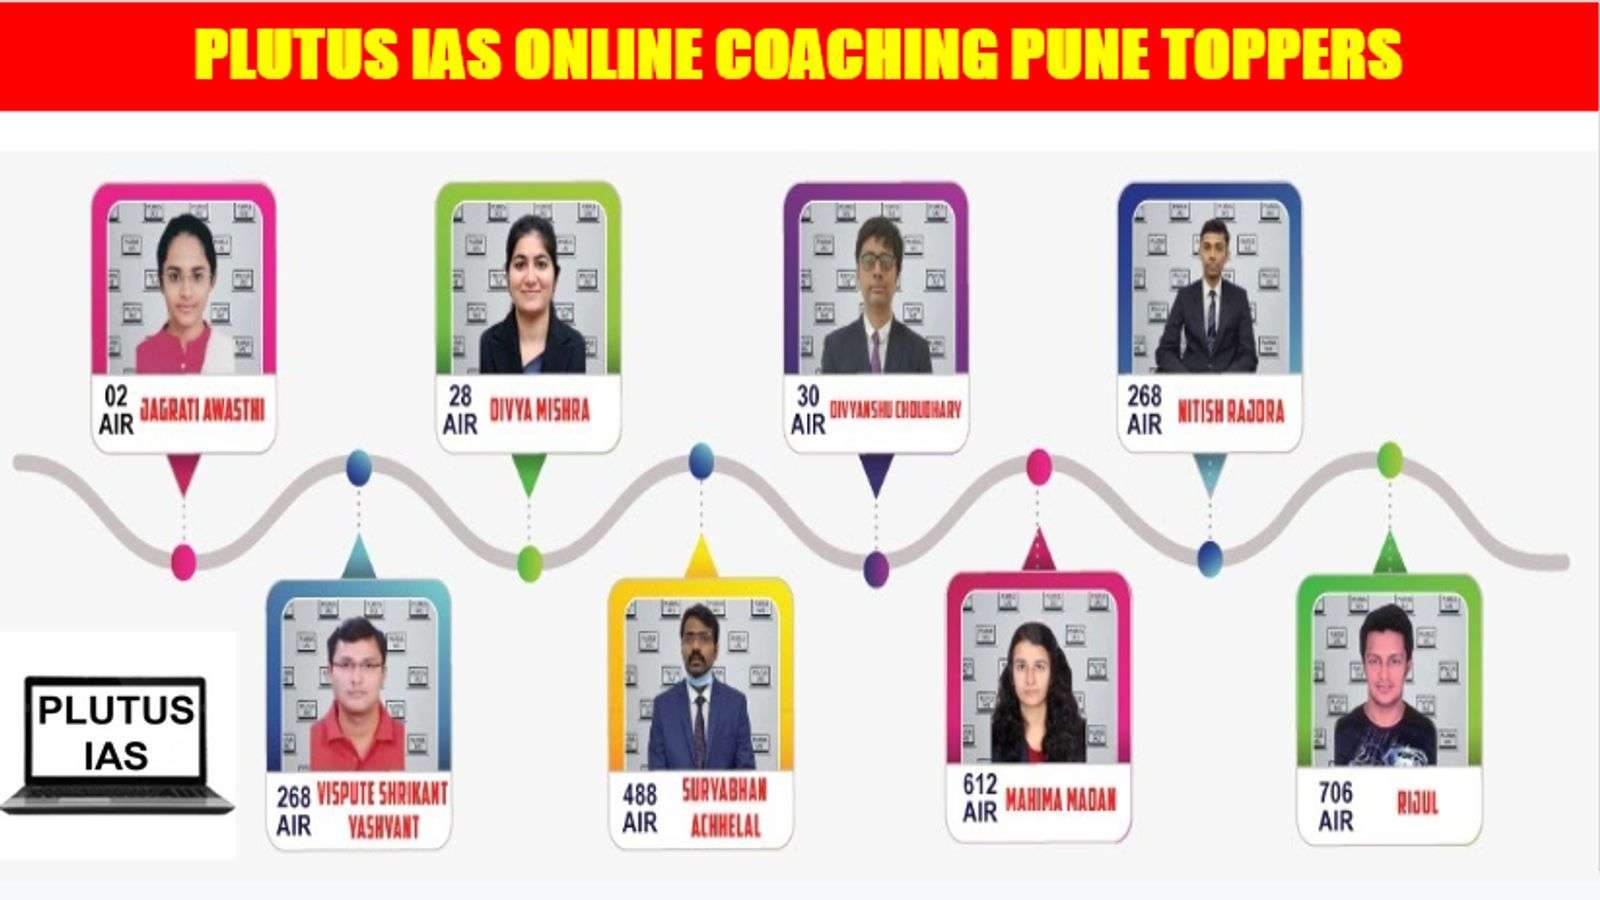 Plutus IAS Online Coaching Pune Toppers